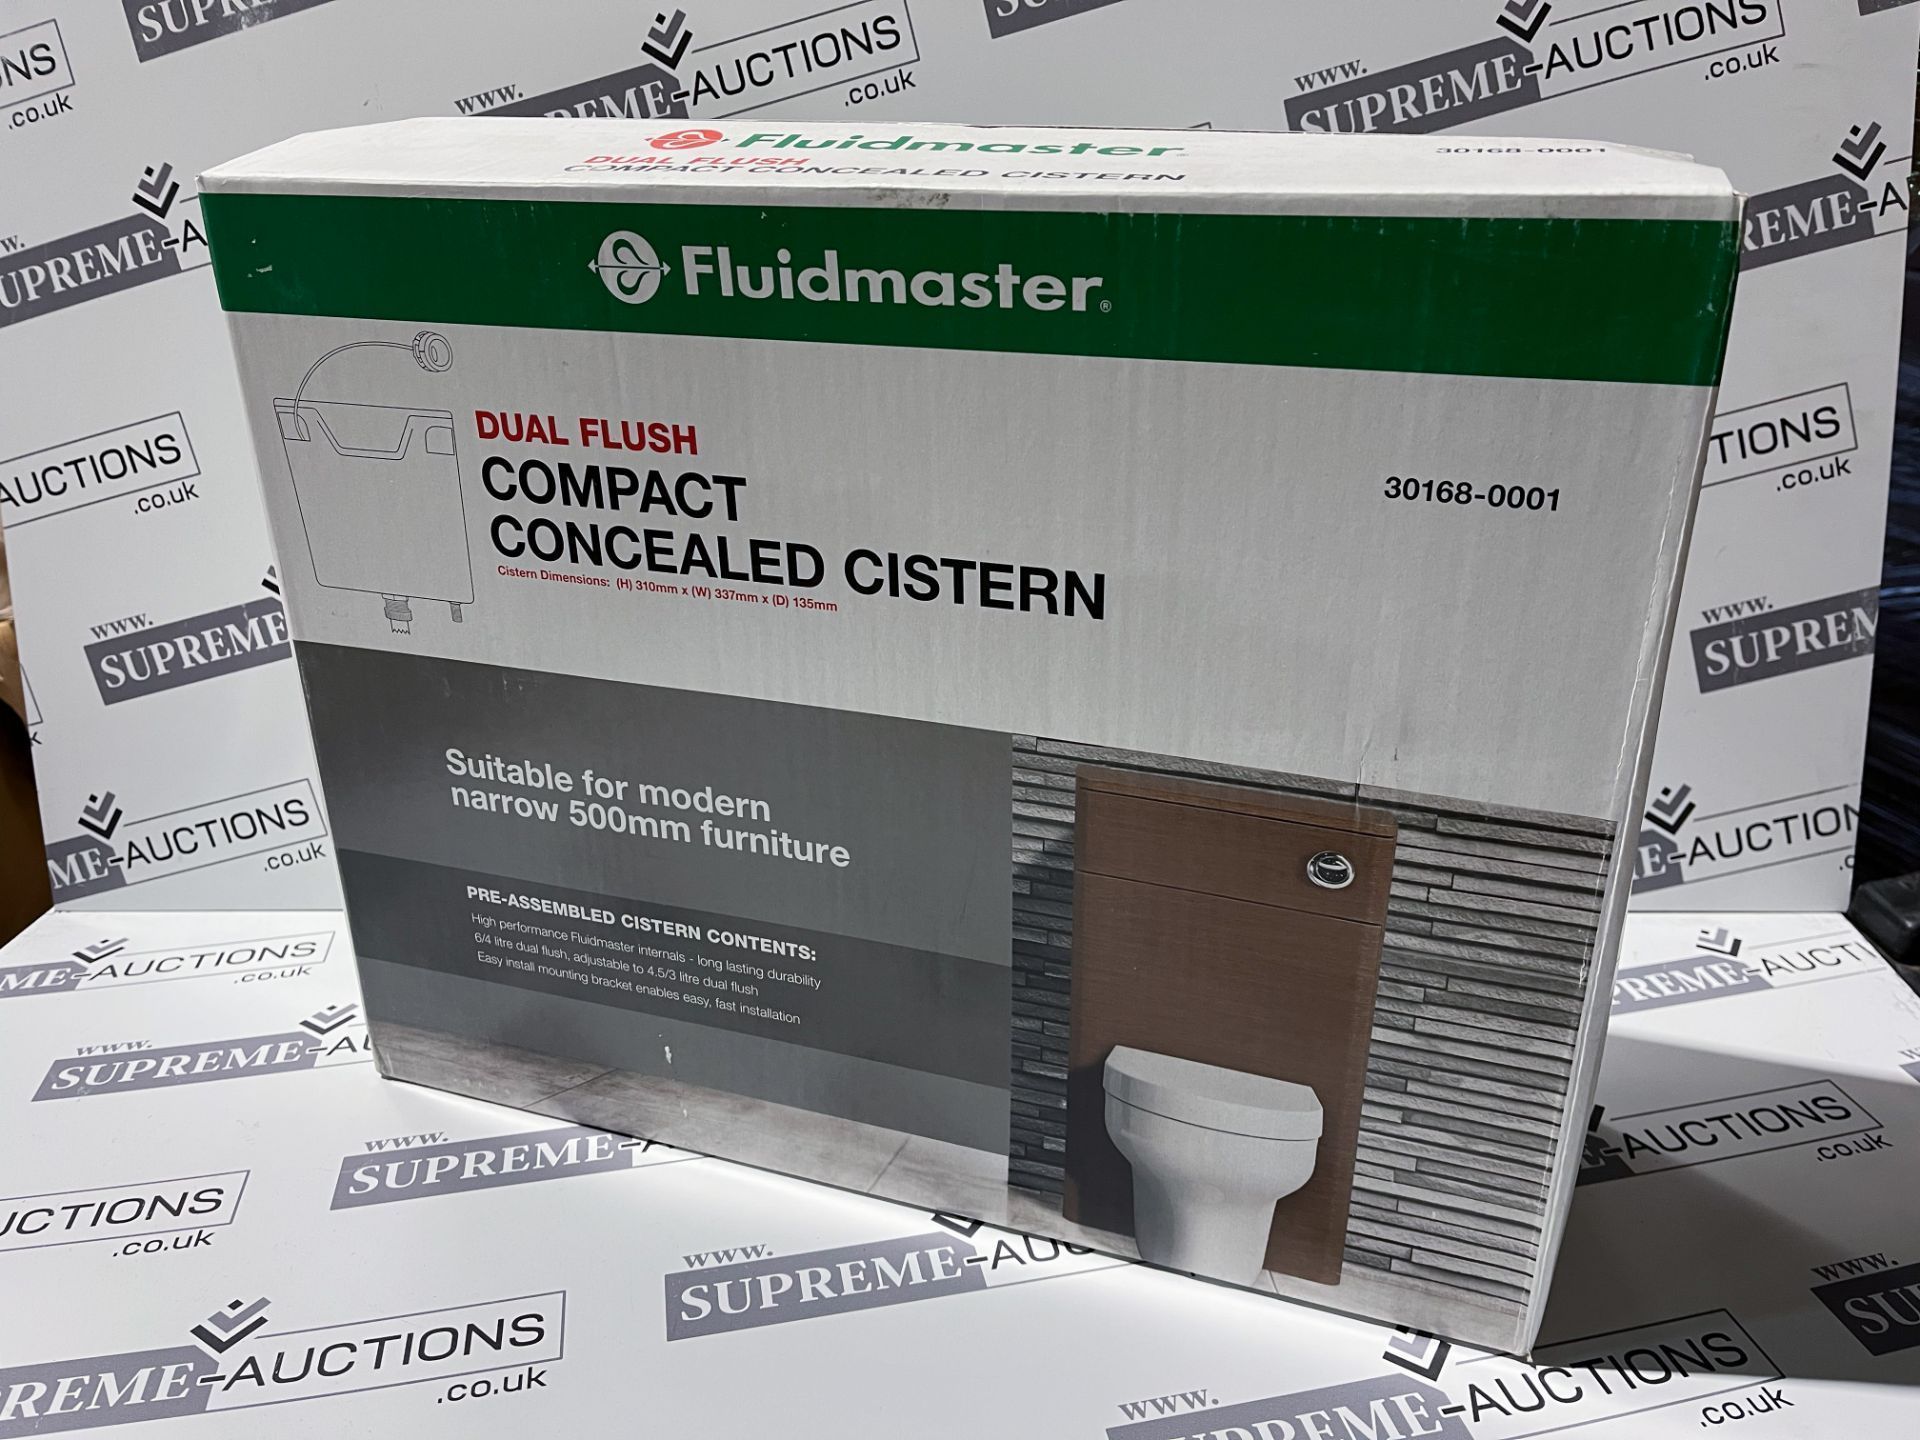 3x FLUIDMASTER DUAL FLUSH COMPACT CONCEALED CISTERNS. (S2LW)